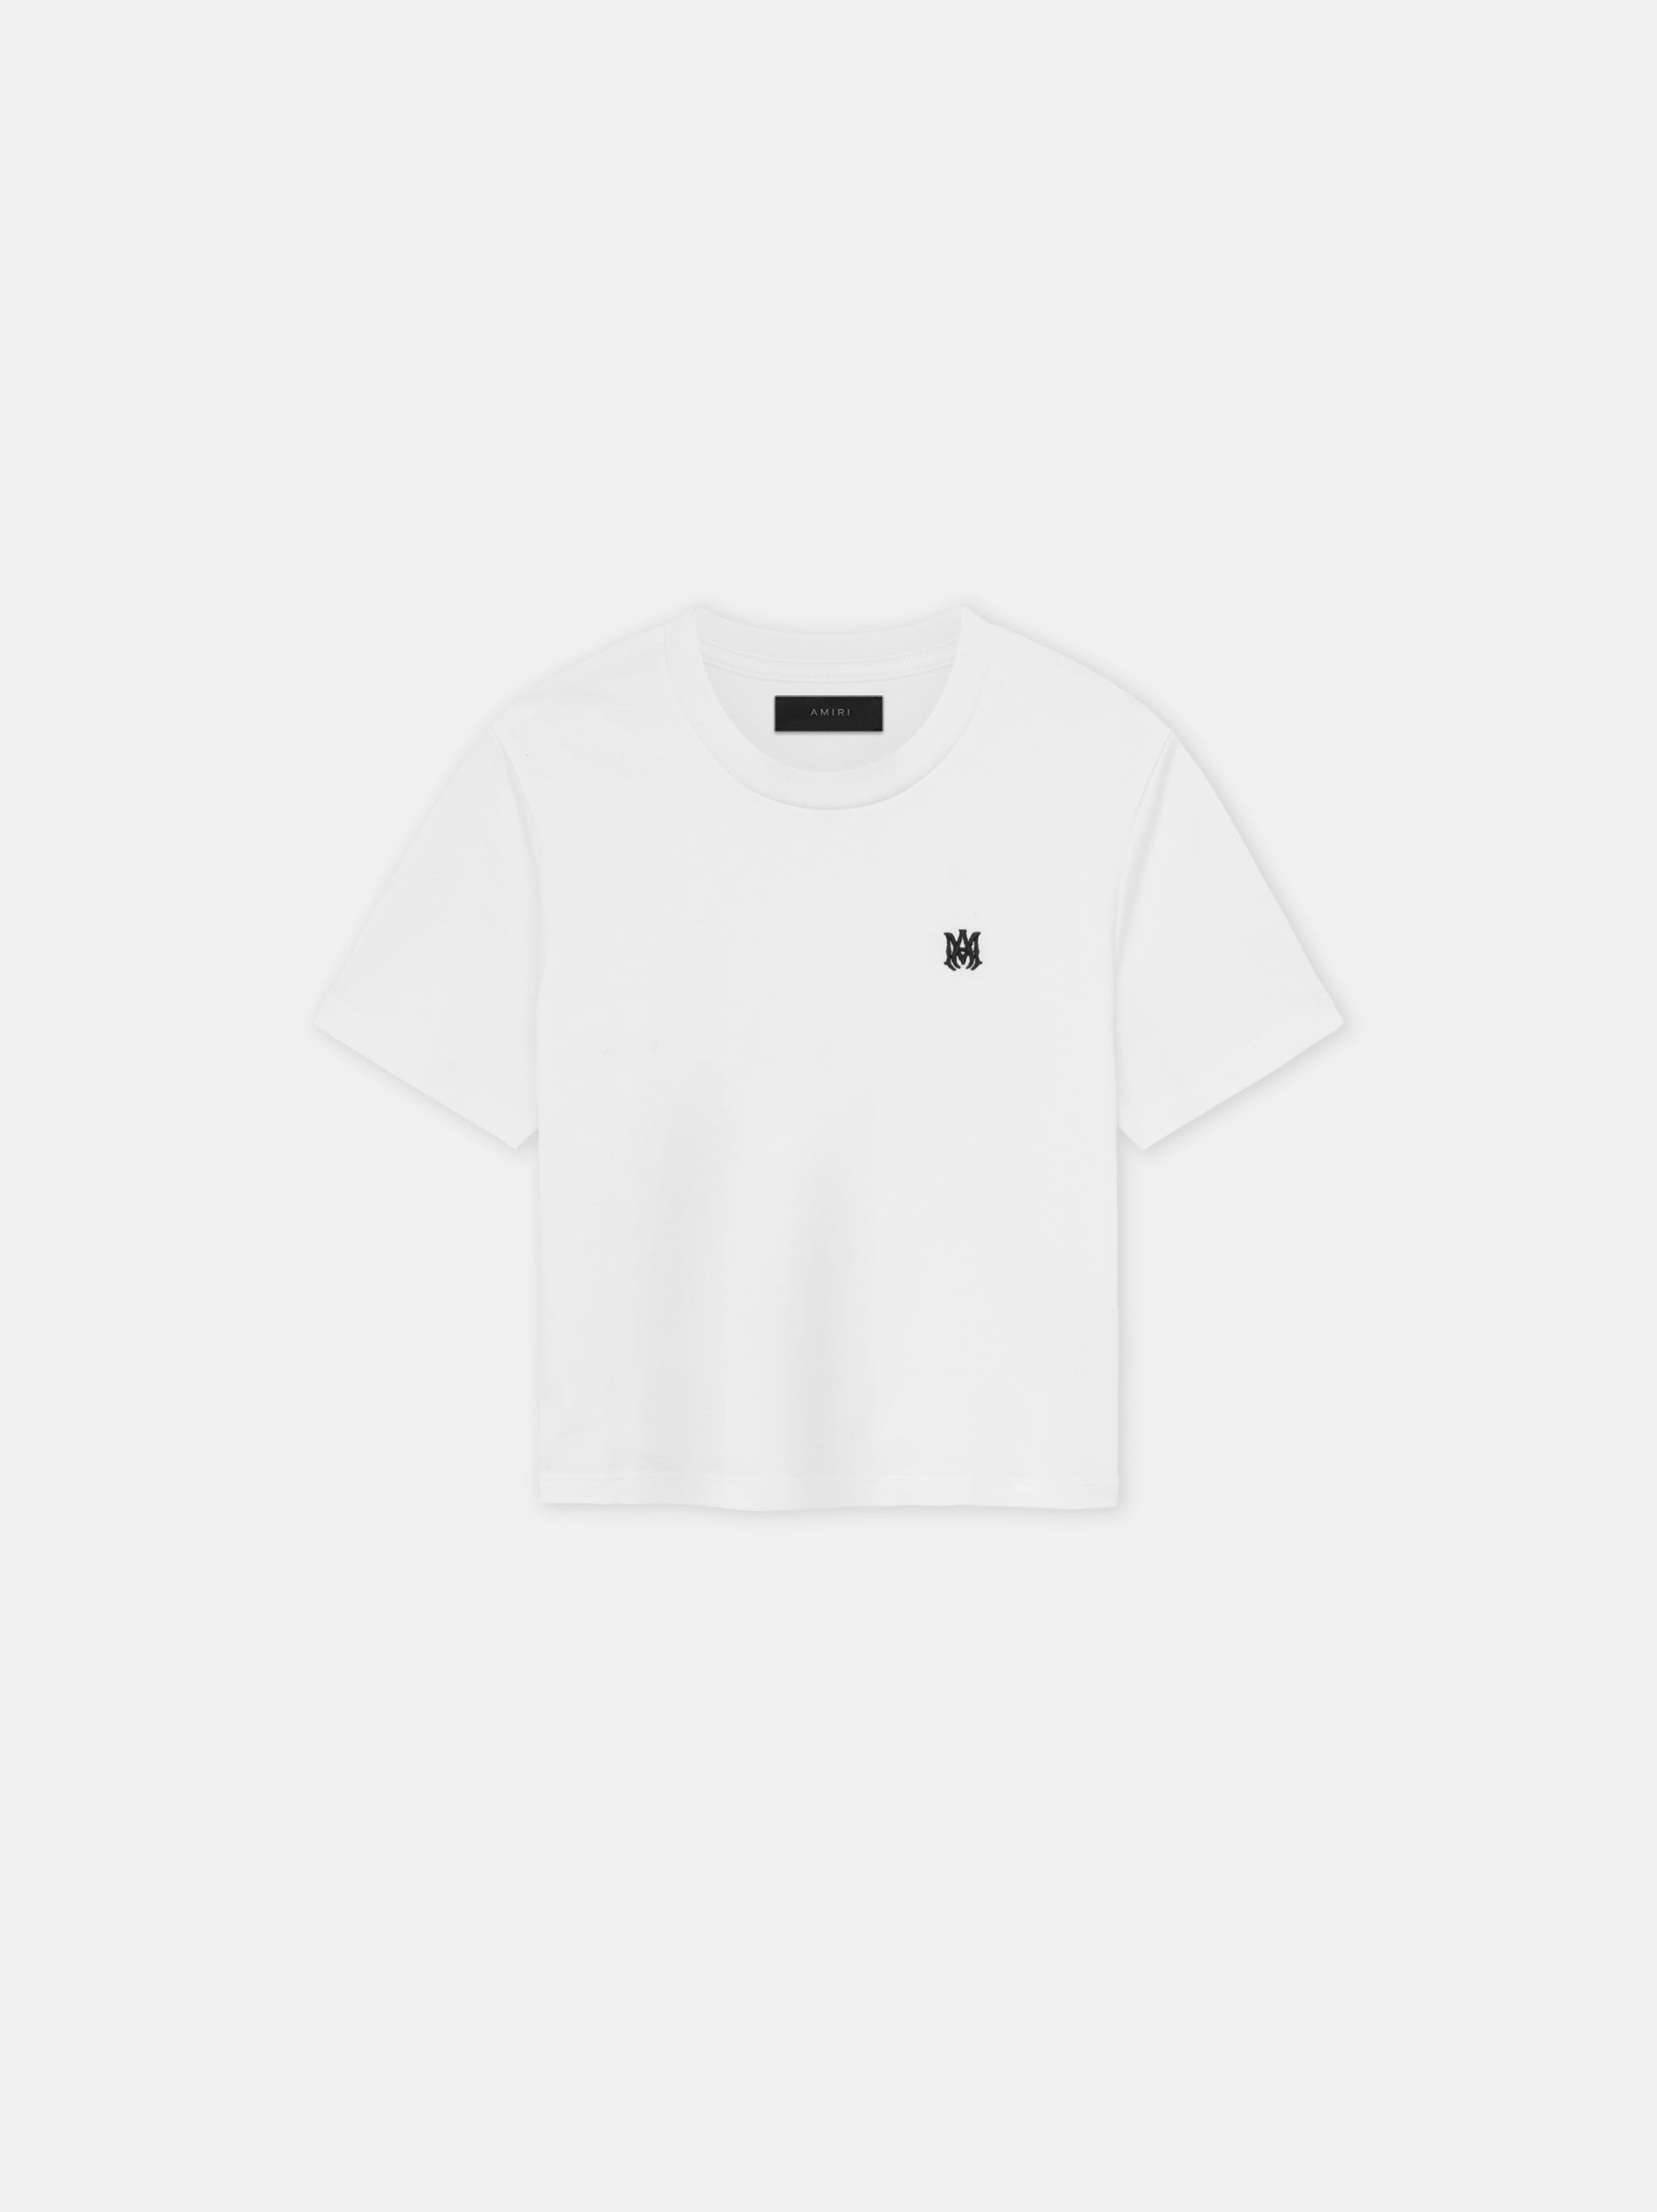 MA EMBROIDERED BABY TEE - 5